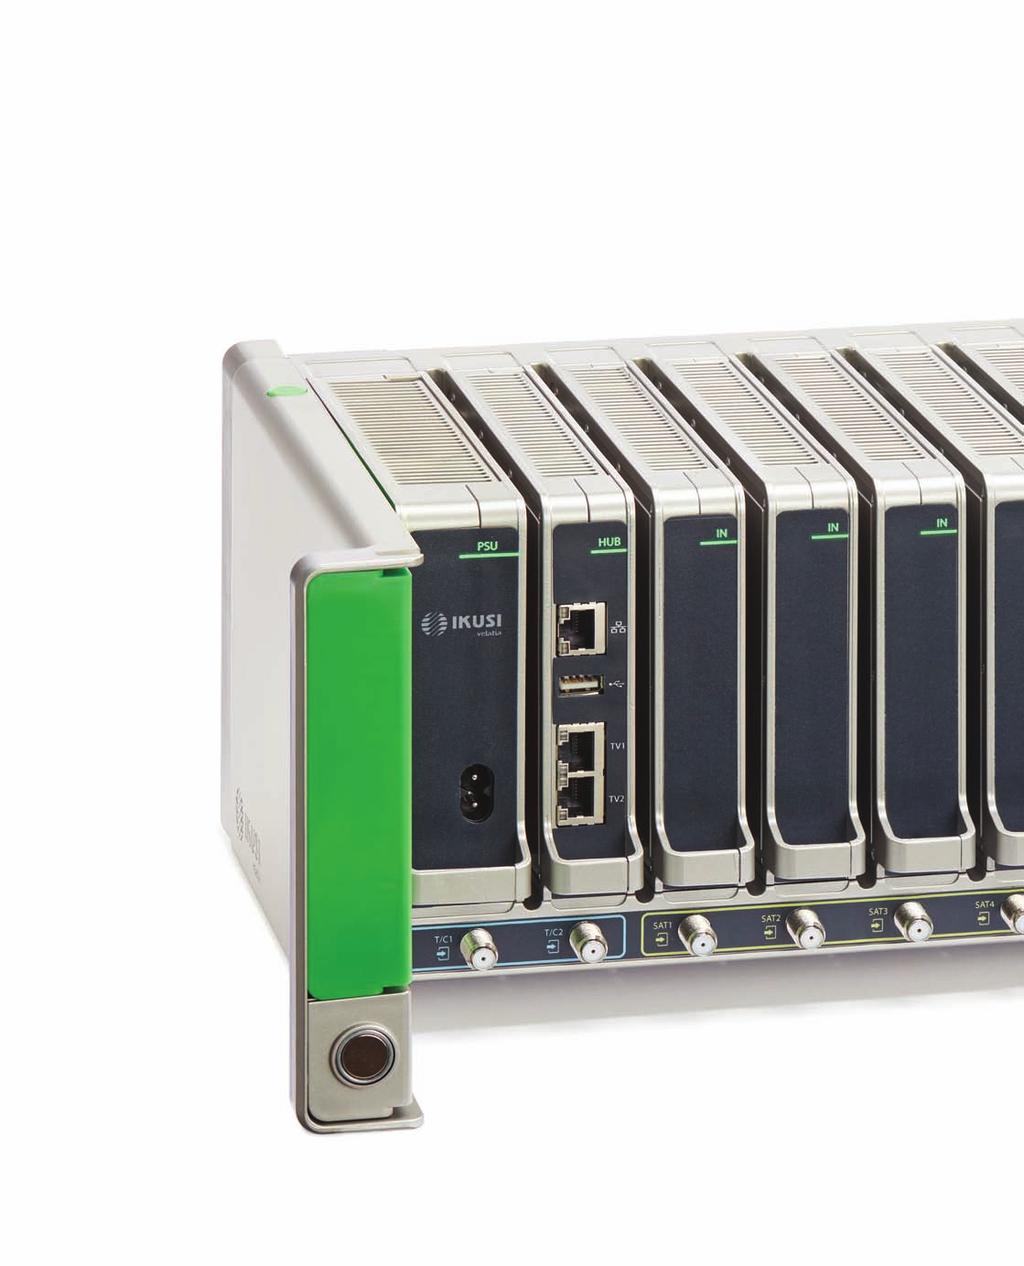 High density Small footprint per channel Capable of processing more than 200 SD services or 120 HD services No need